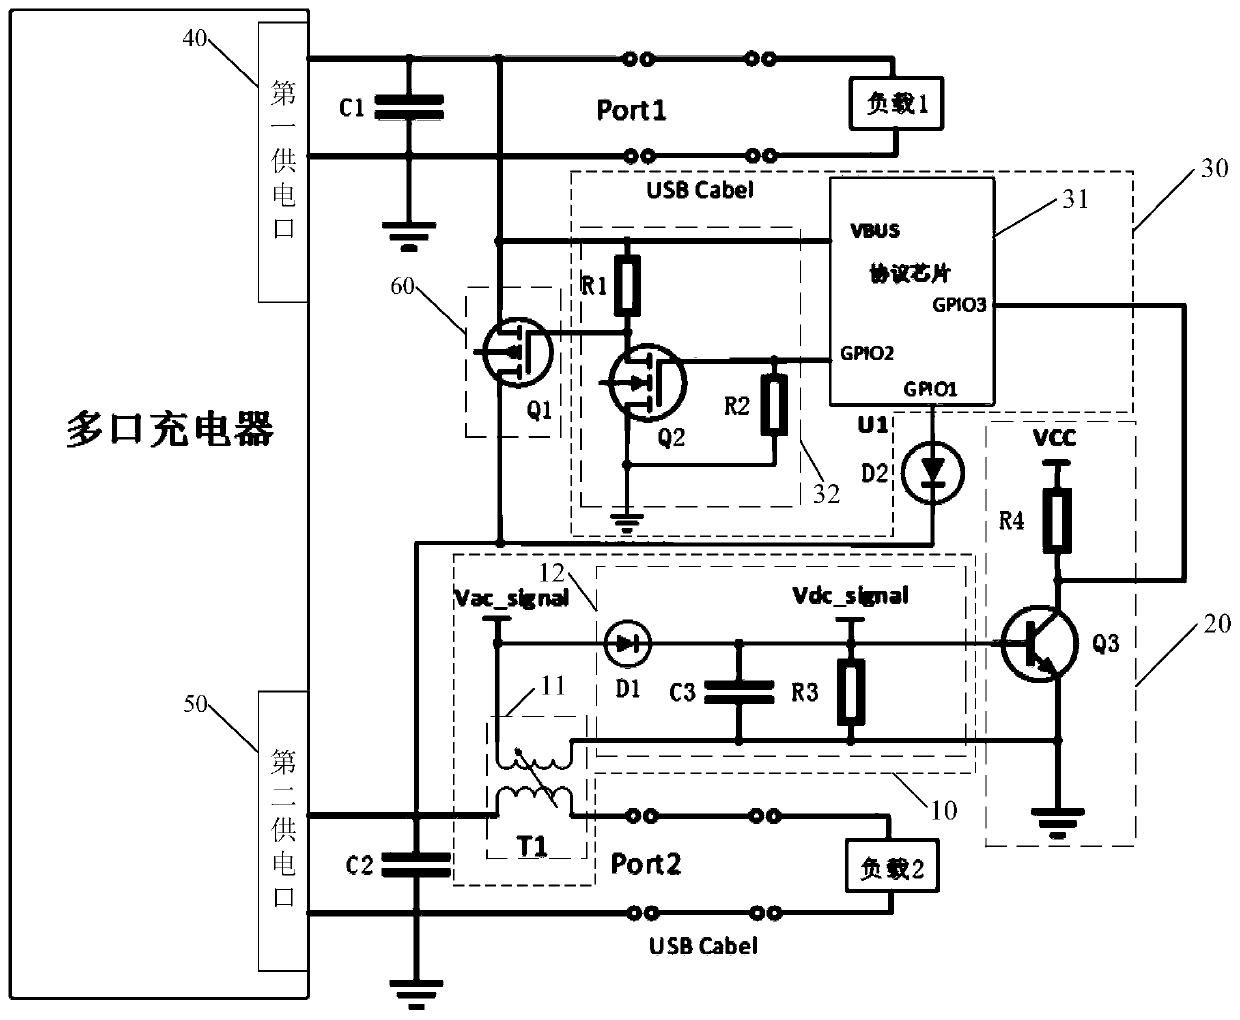 Load connection identification circuit of switching power supply and multi-port charger